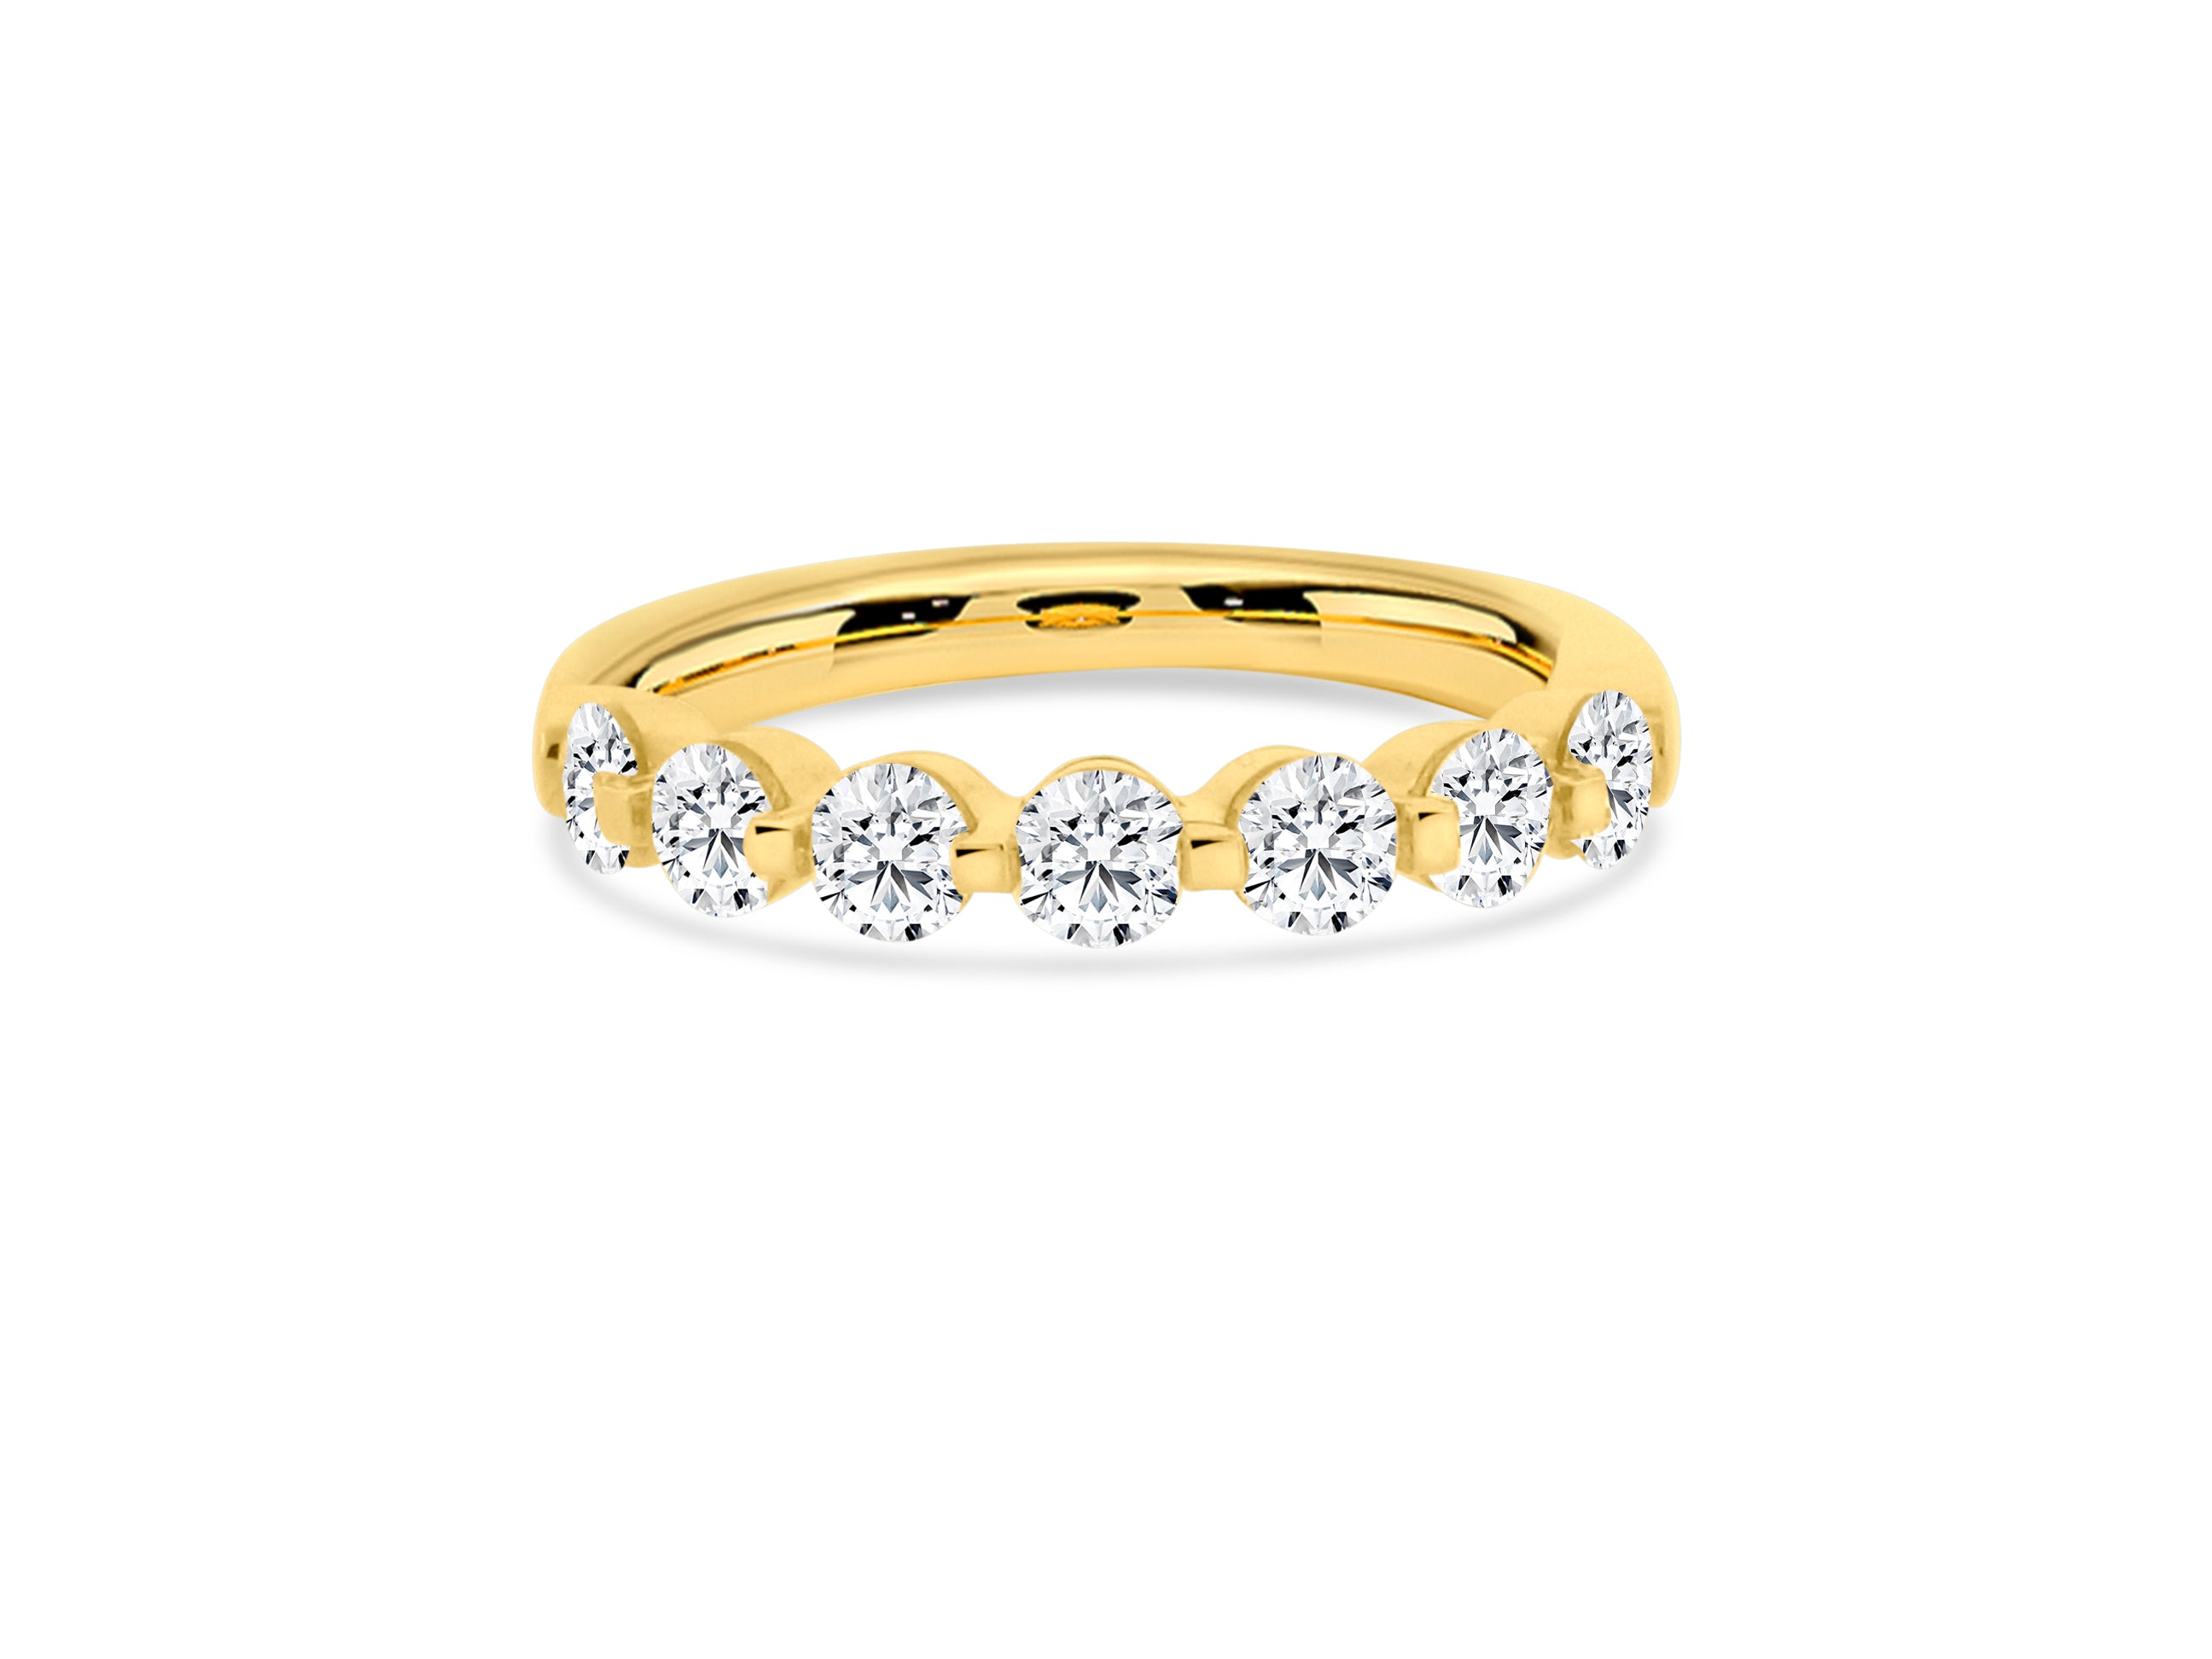 MULLOYS PRIVE'18K YELLOW GOLD  1.05CT VS-SI CLARITY G COLOR DIAMOND PURITY BAND 7 STONE